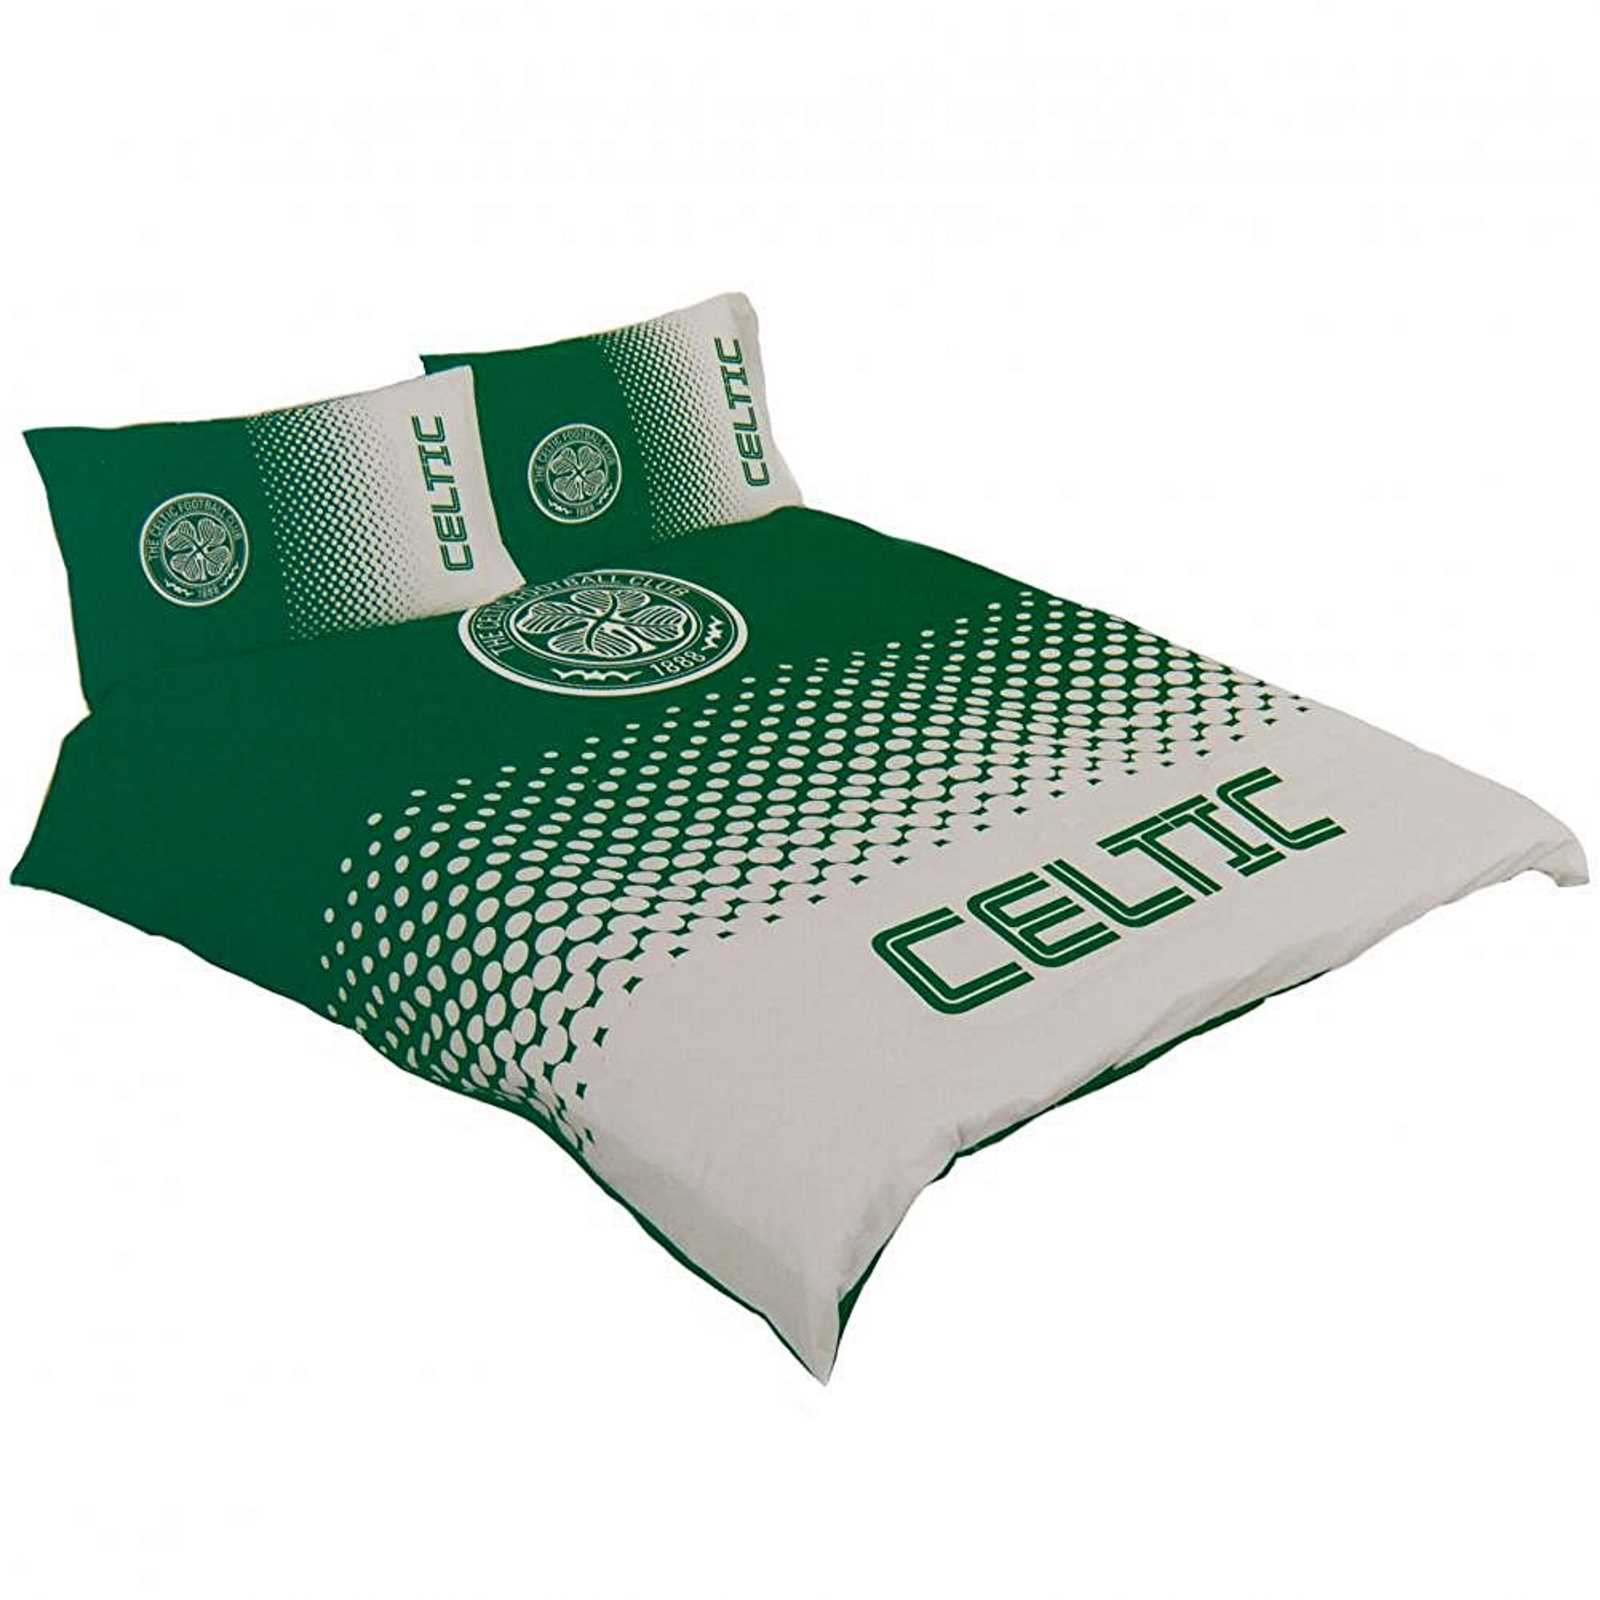 Celtic Bedding Pyramid Collection Eternity Tree Celtic Bedspread